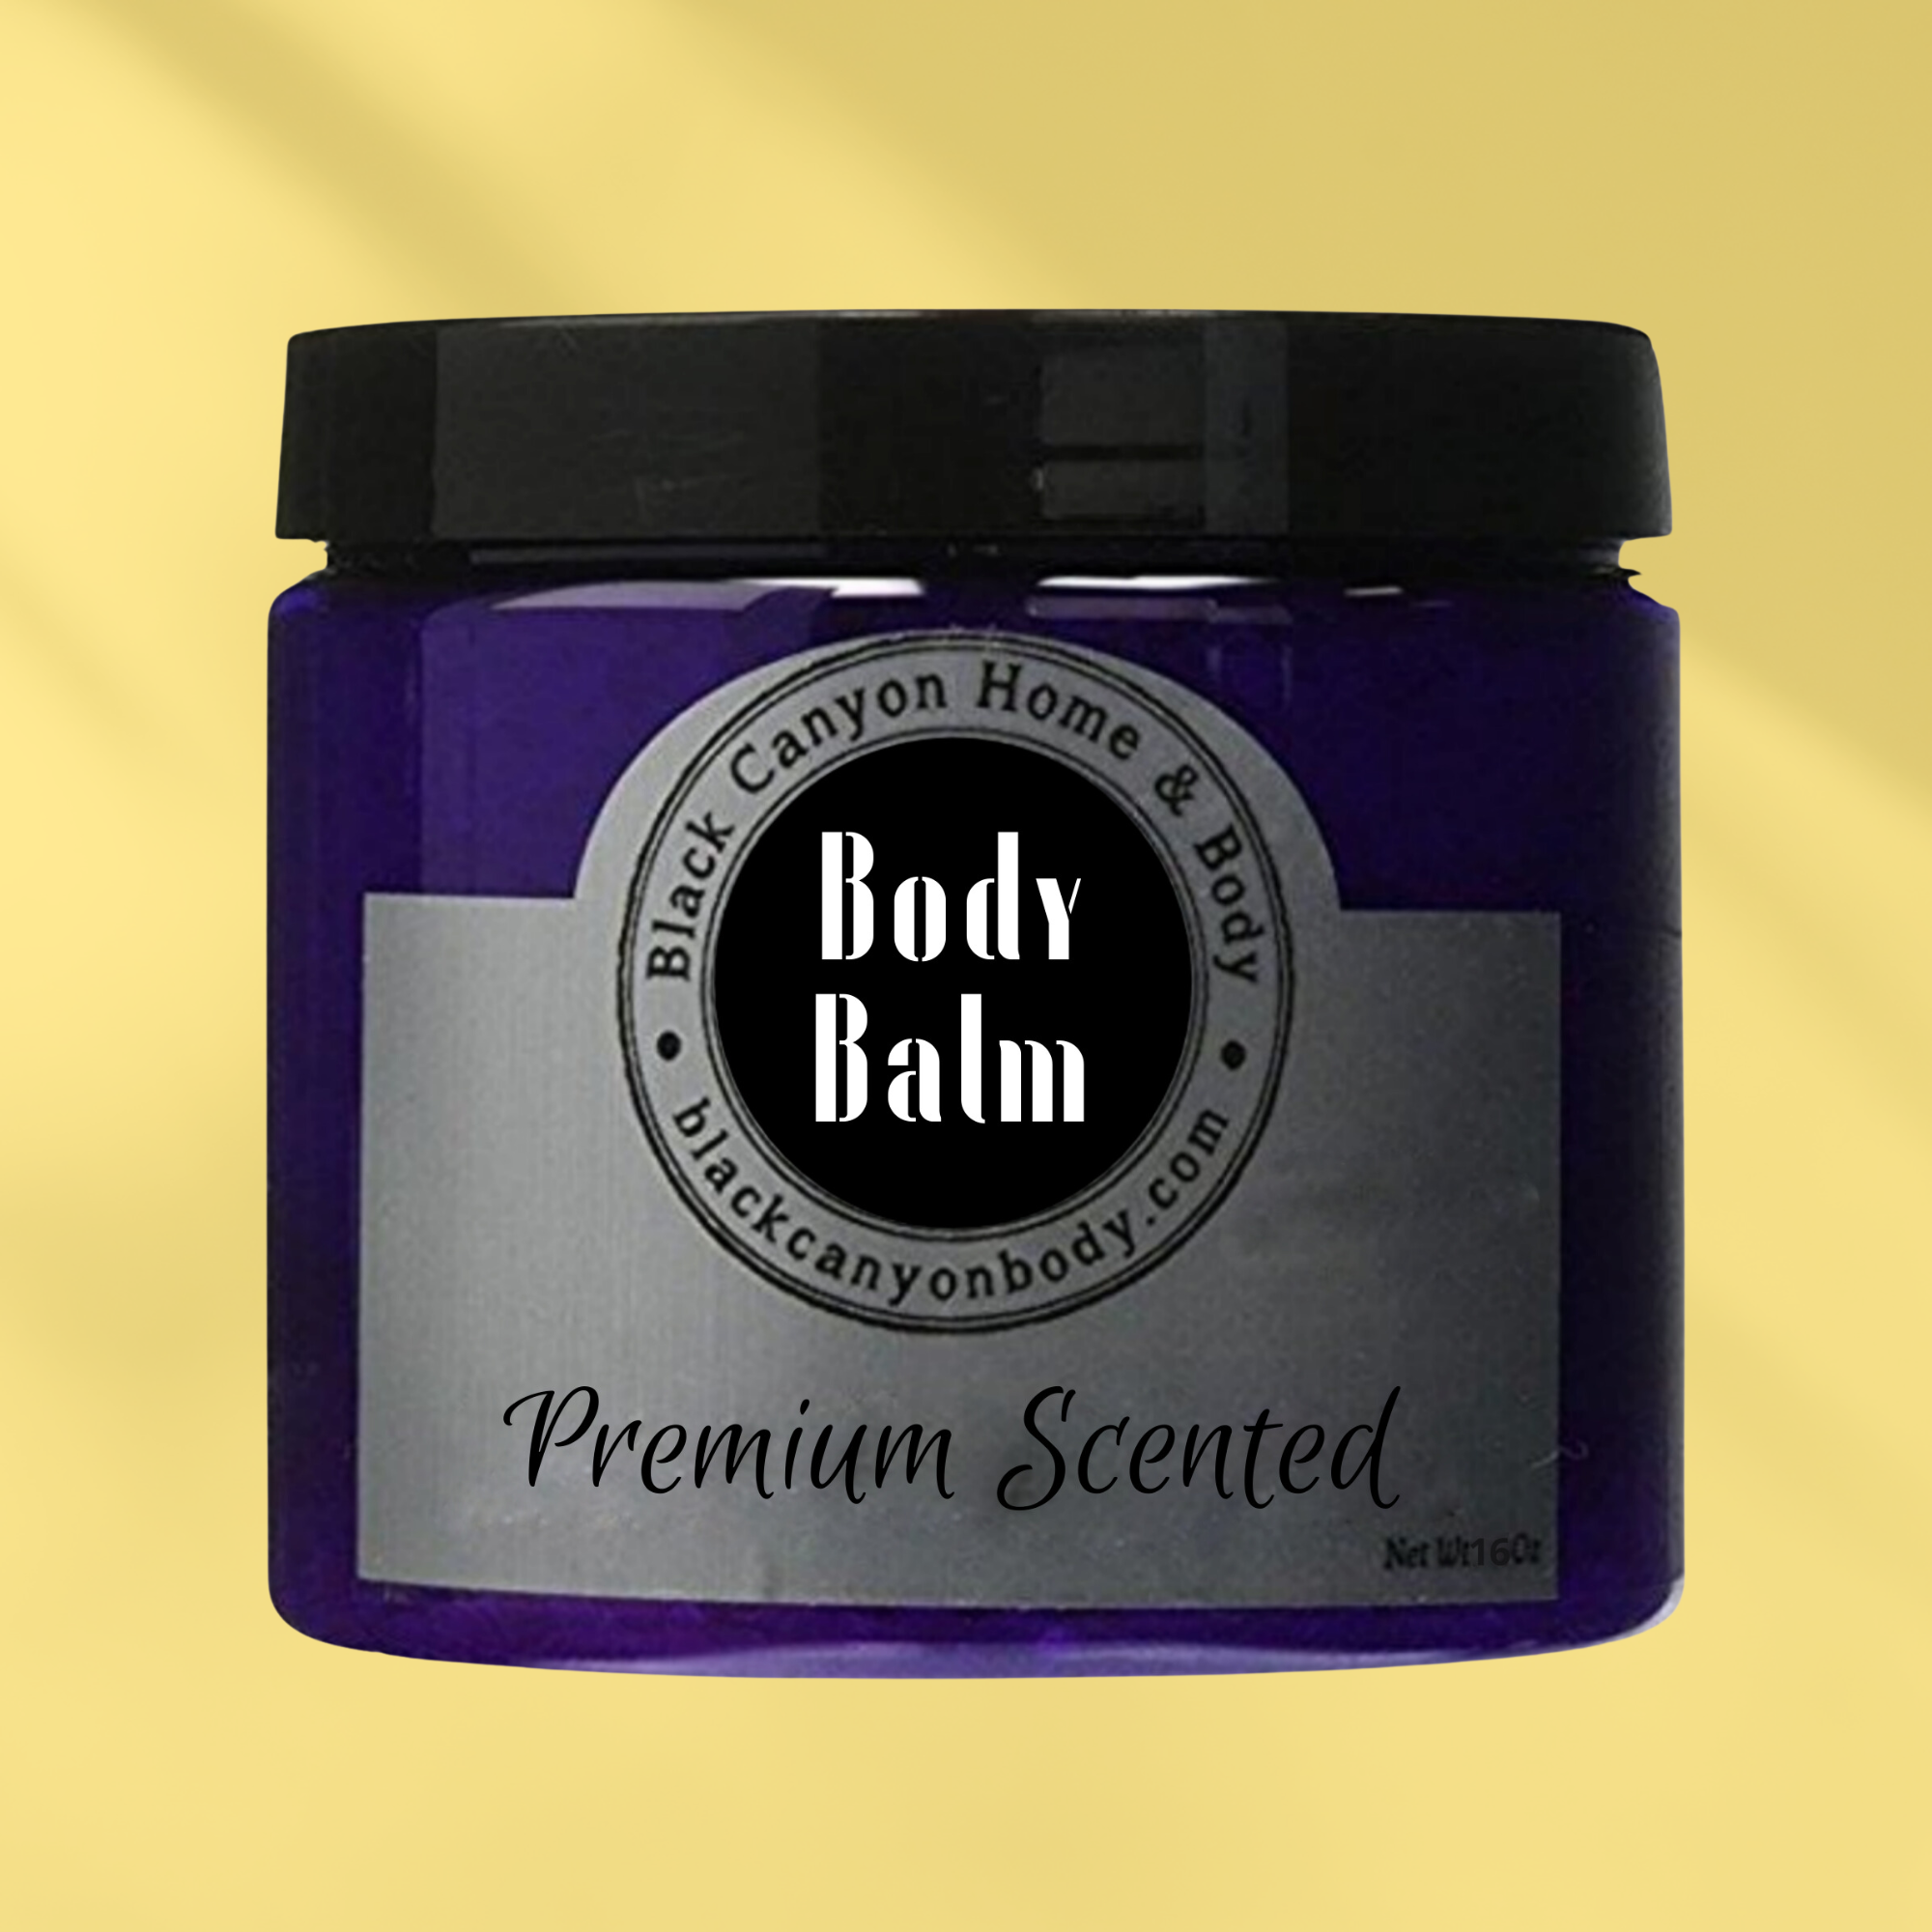 Black Canyon Buttered Rum Scented Natural Body Balm with Shea